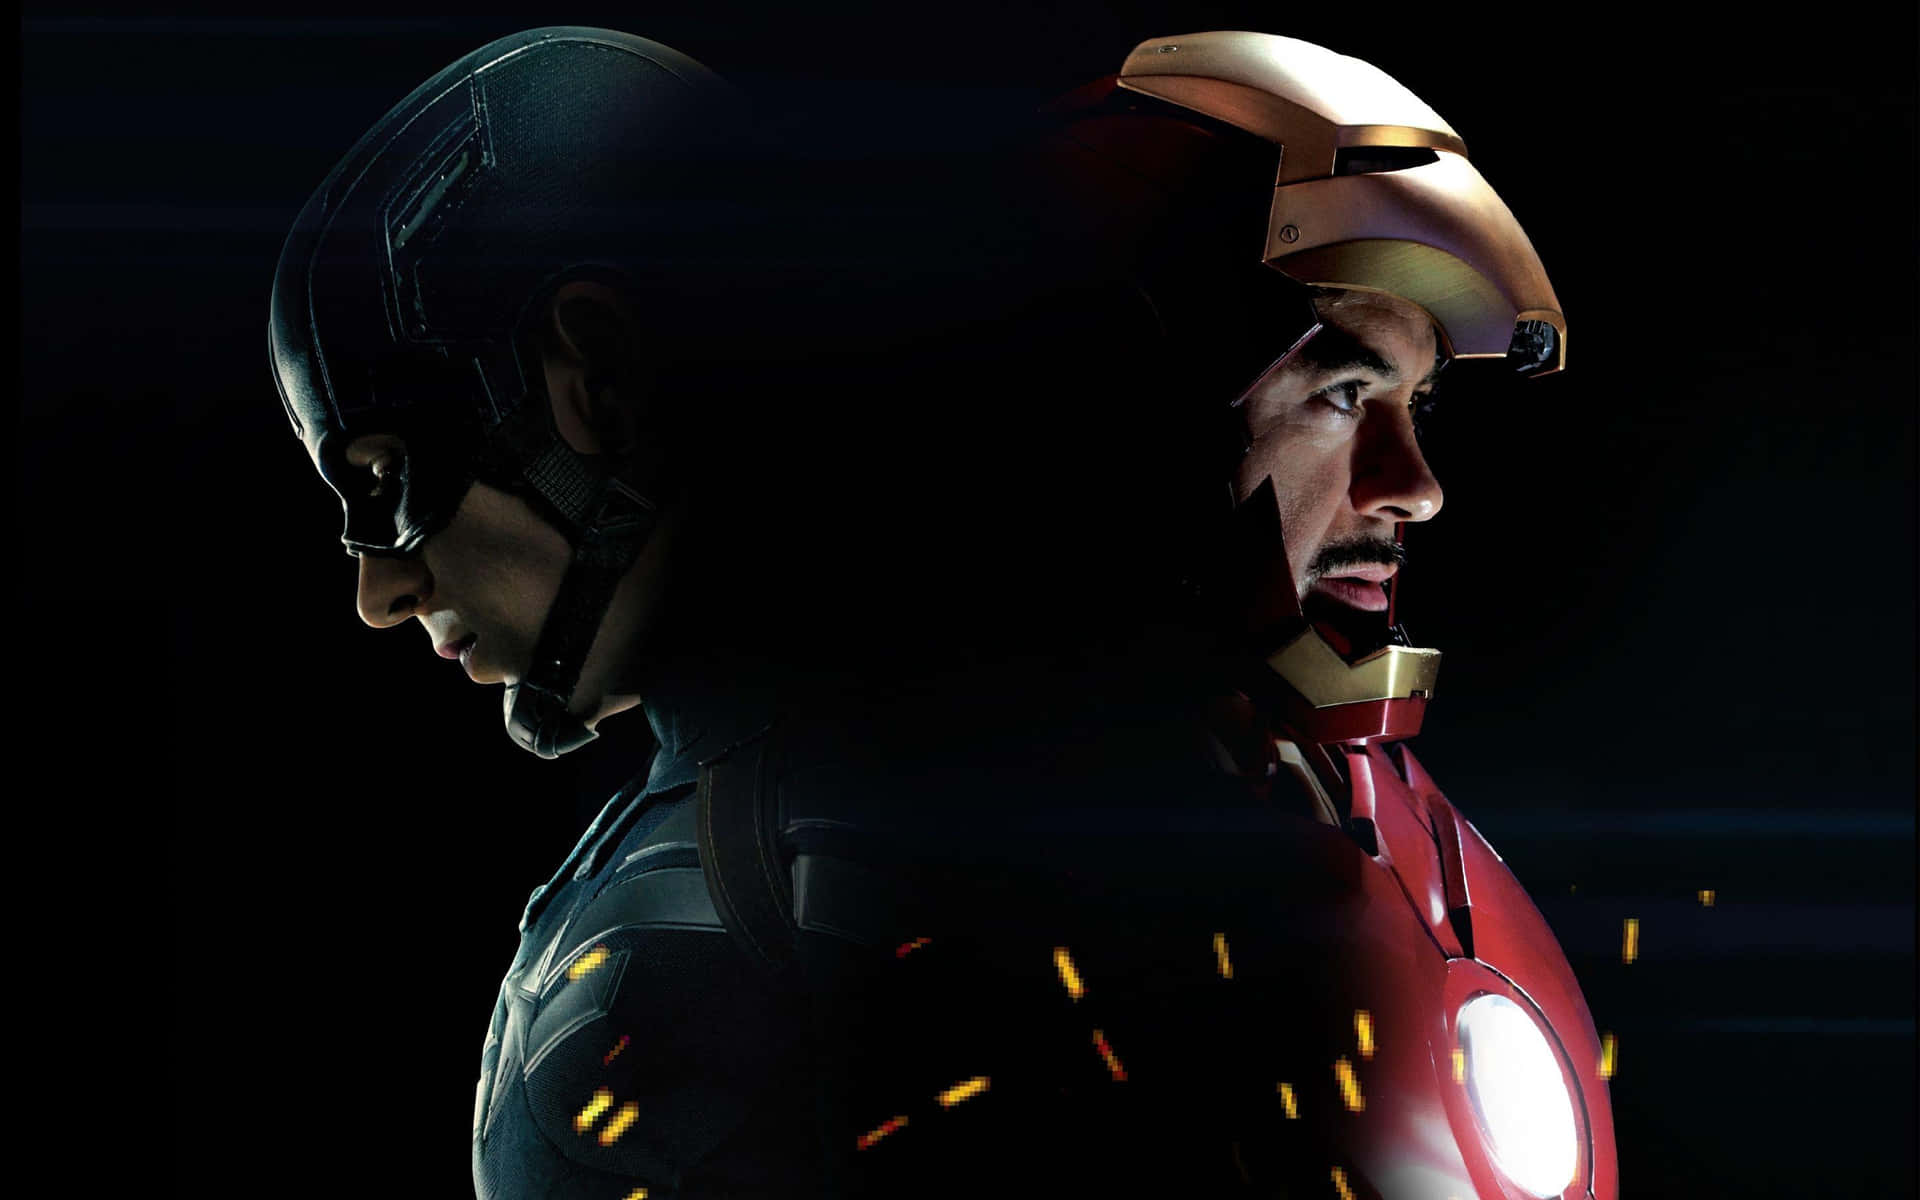 It's a showdown between two of Marvel's most powerful heroes - Iron Man and Captain America. Wallpaper